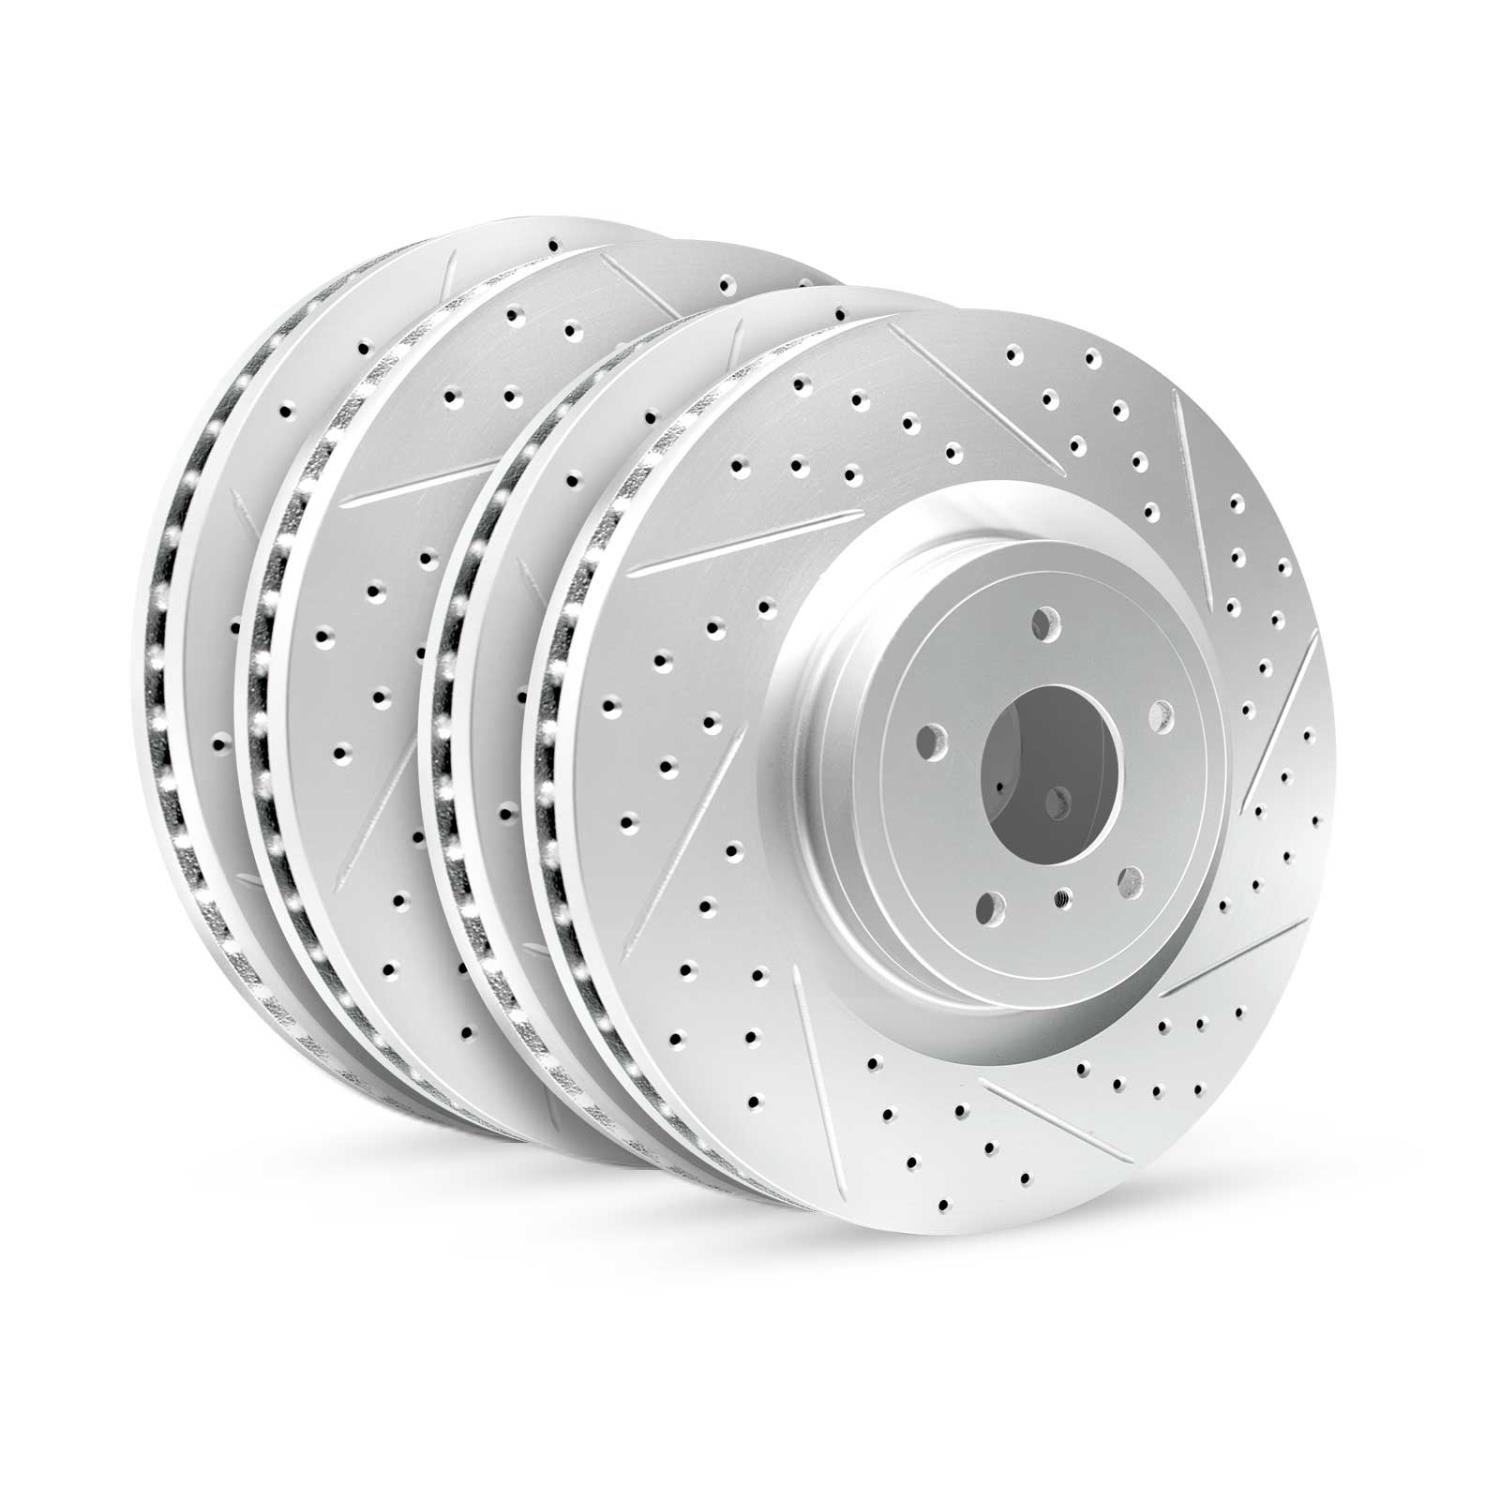 GEO-Carbon Drilled/Slotted Rotors, 1990-1996 Infiniti/Nissan, Position: Front/Rear